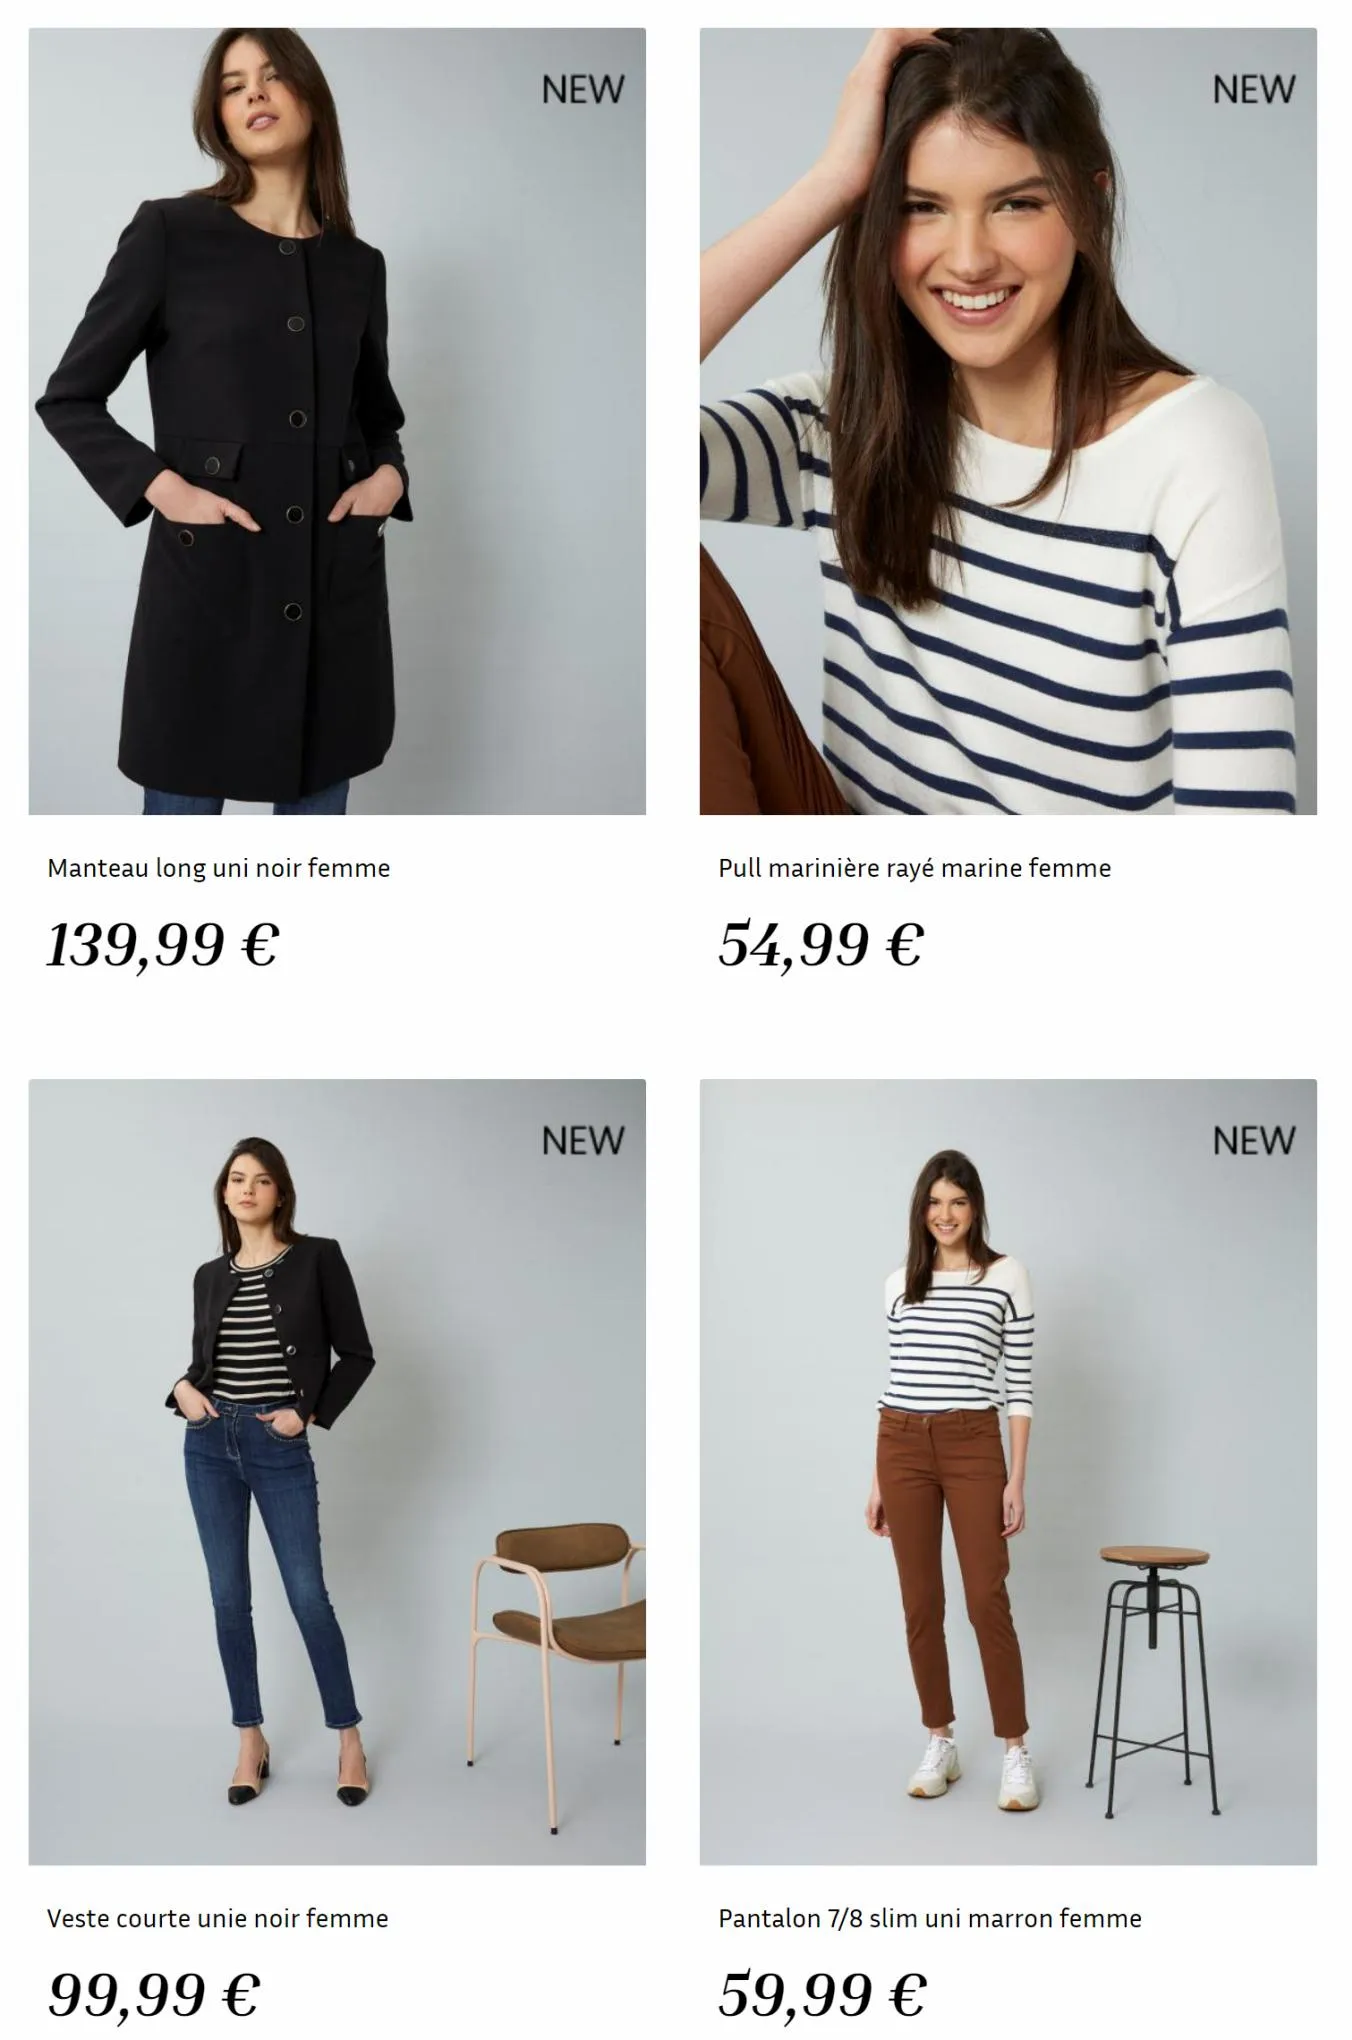 Catalogue SOLDES 60%, page 00002